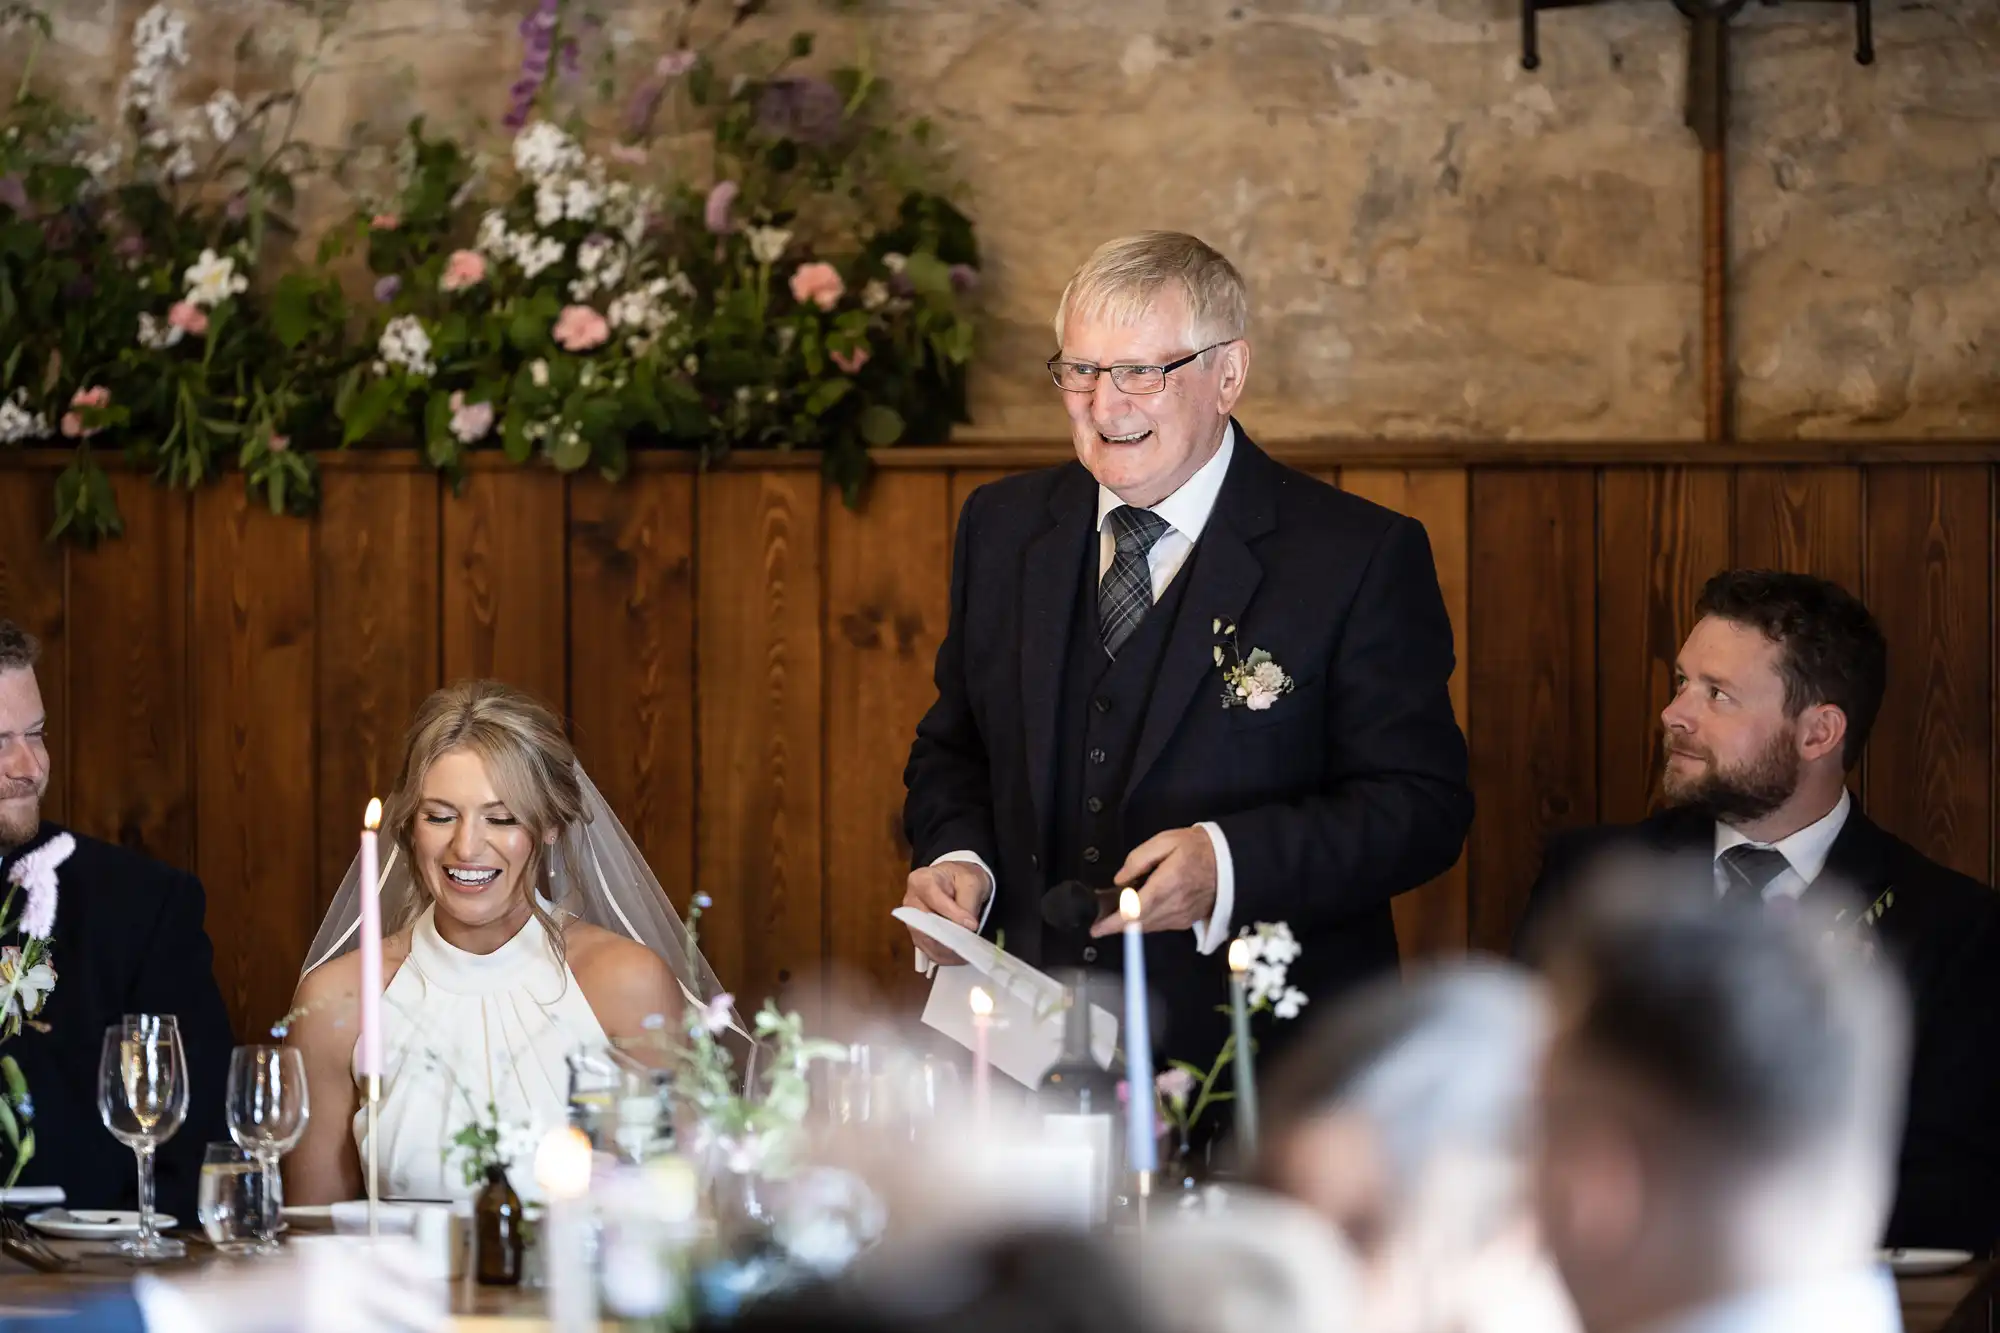 An elderly man gives a speech at a wedding reception, smiling guests including a bride and a groom seated at the table.